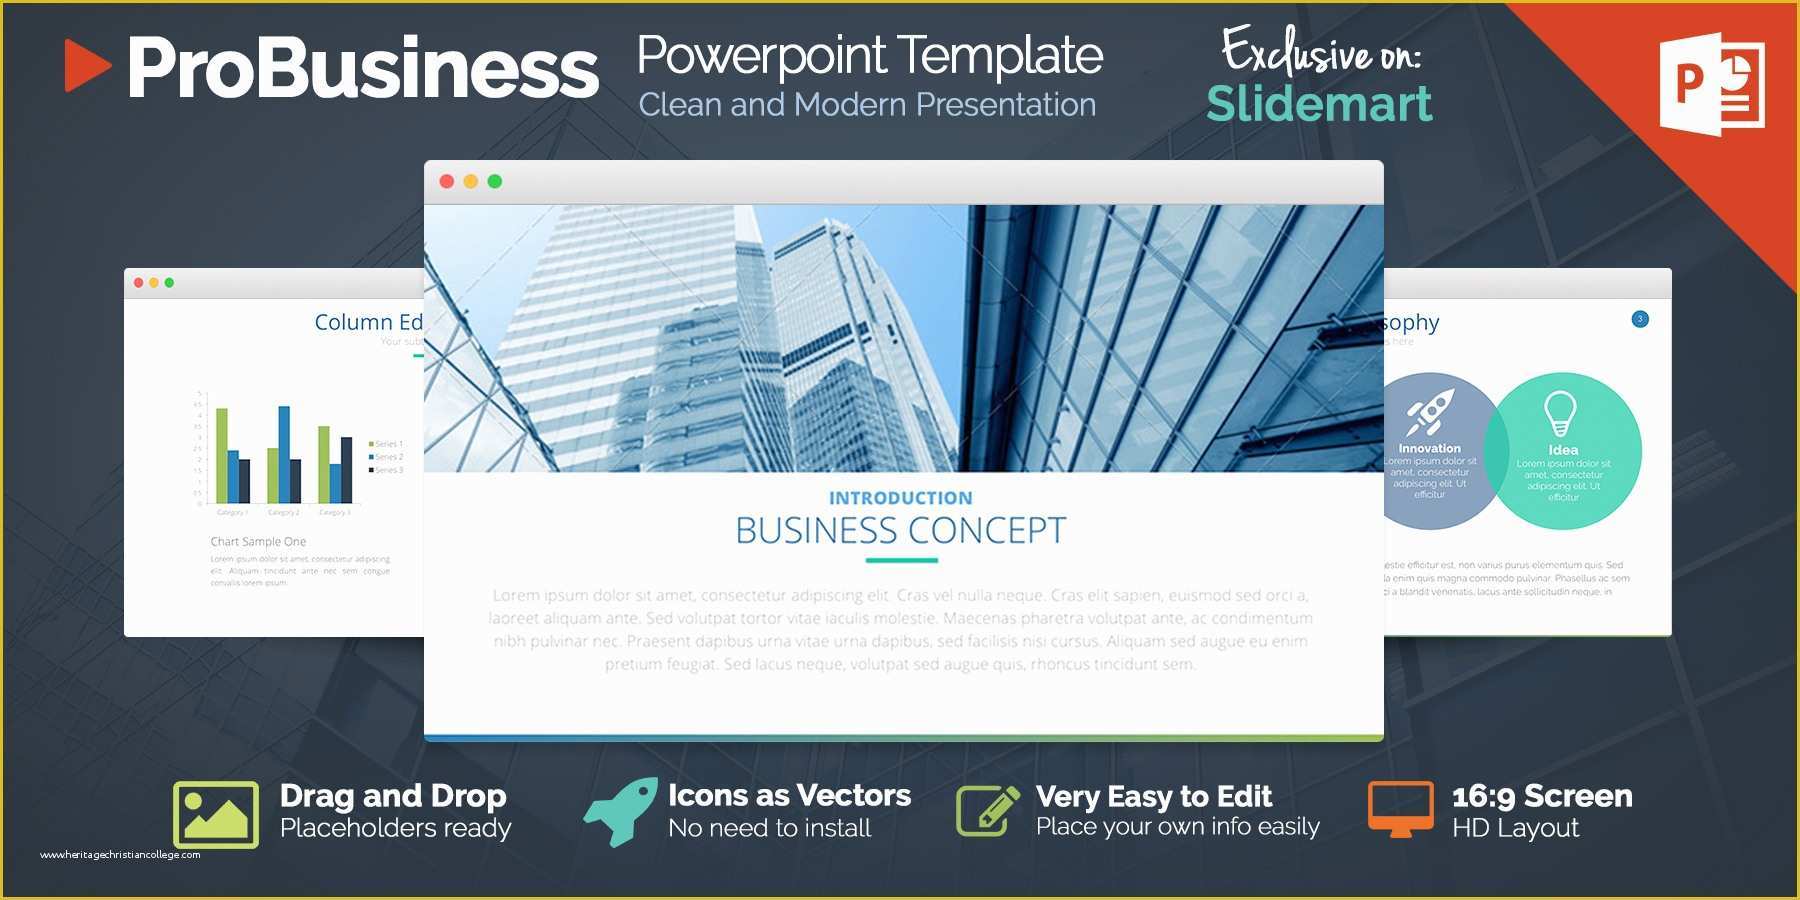 Free Powerpoint Template Design Of the Best 8 Free Powerpoint Templates